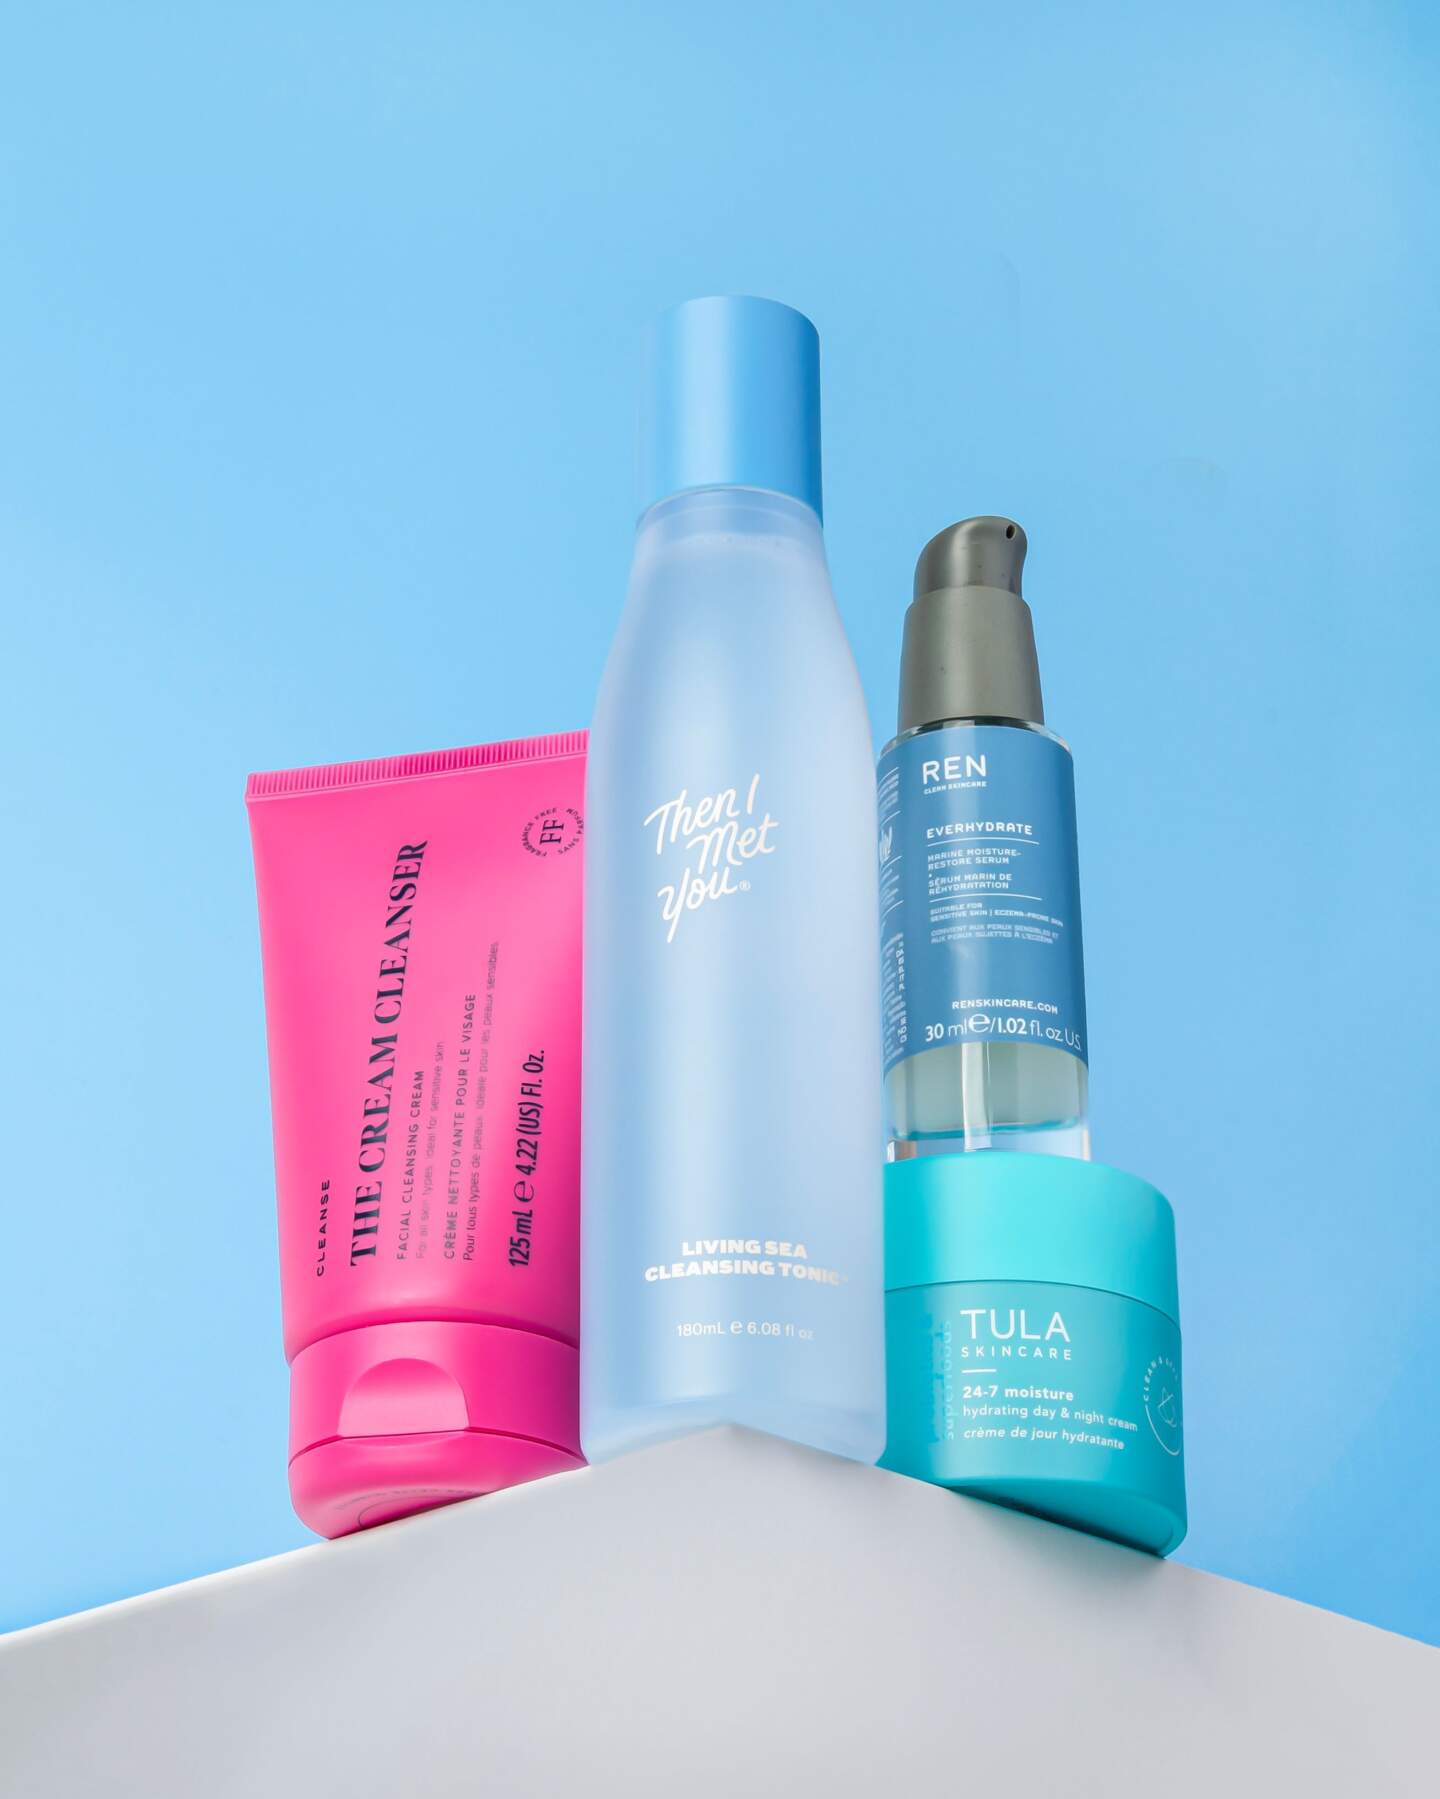 THE REHYDRATE BOX BRAND OFFERS